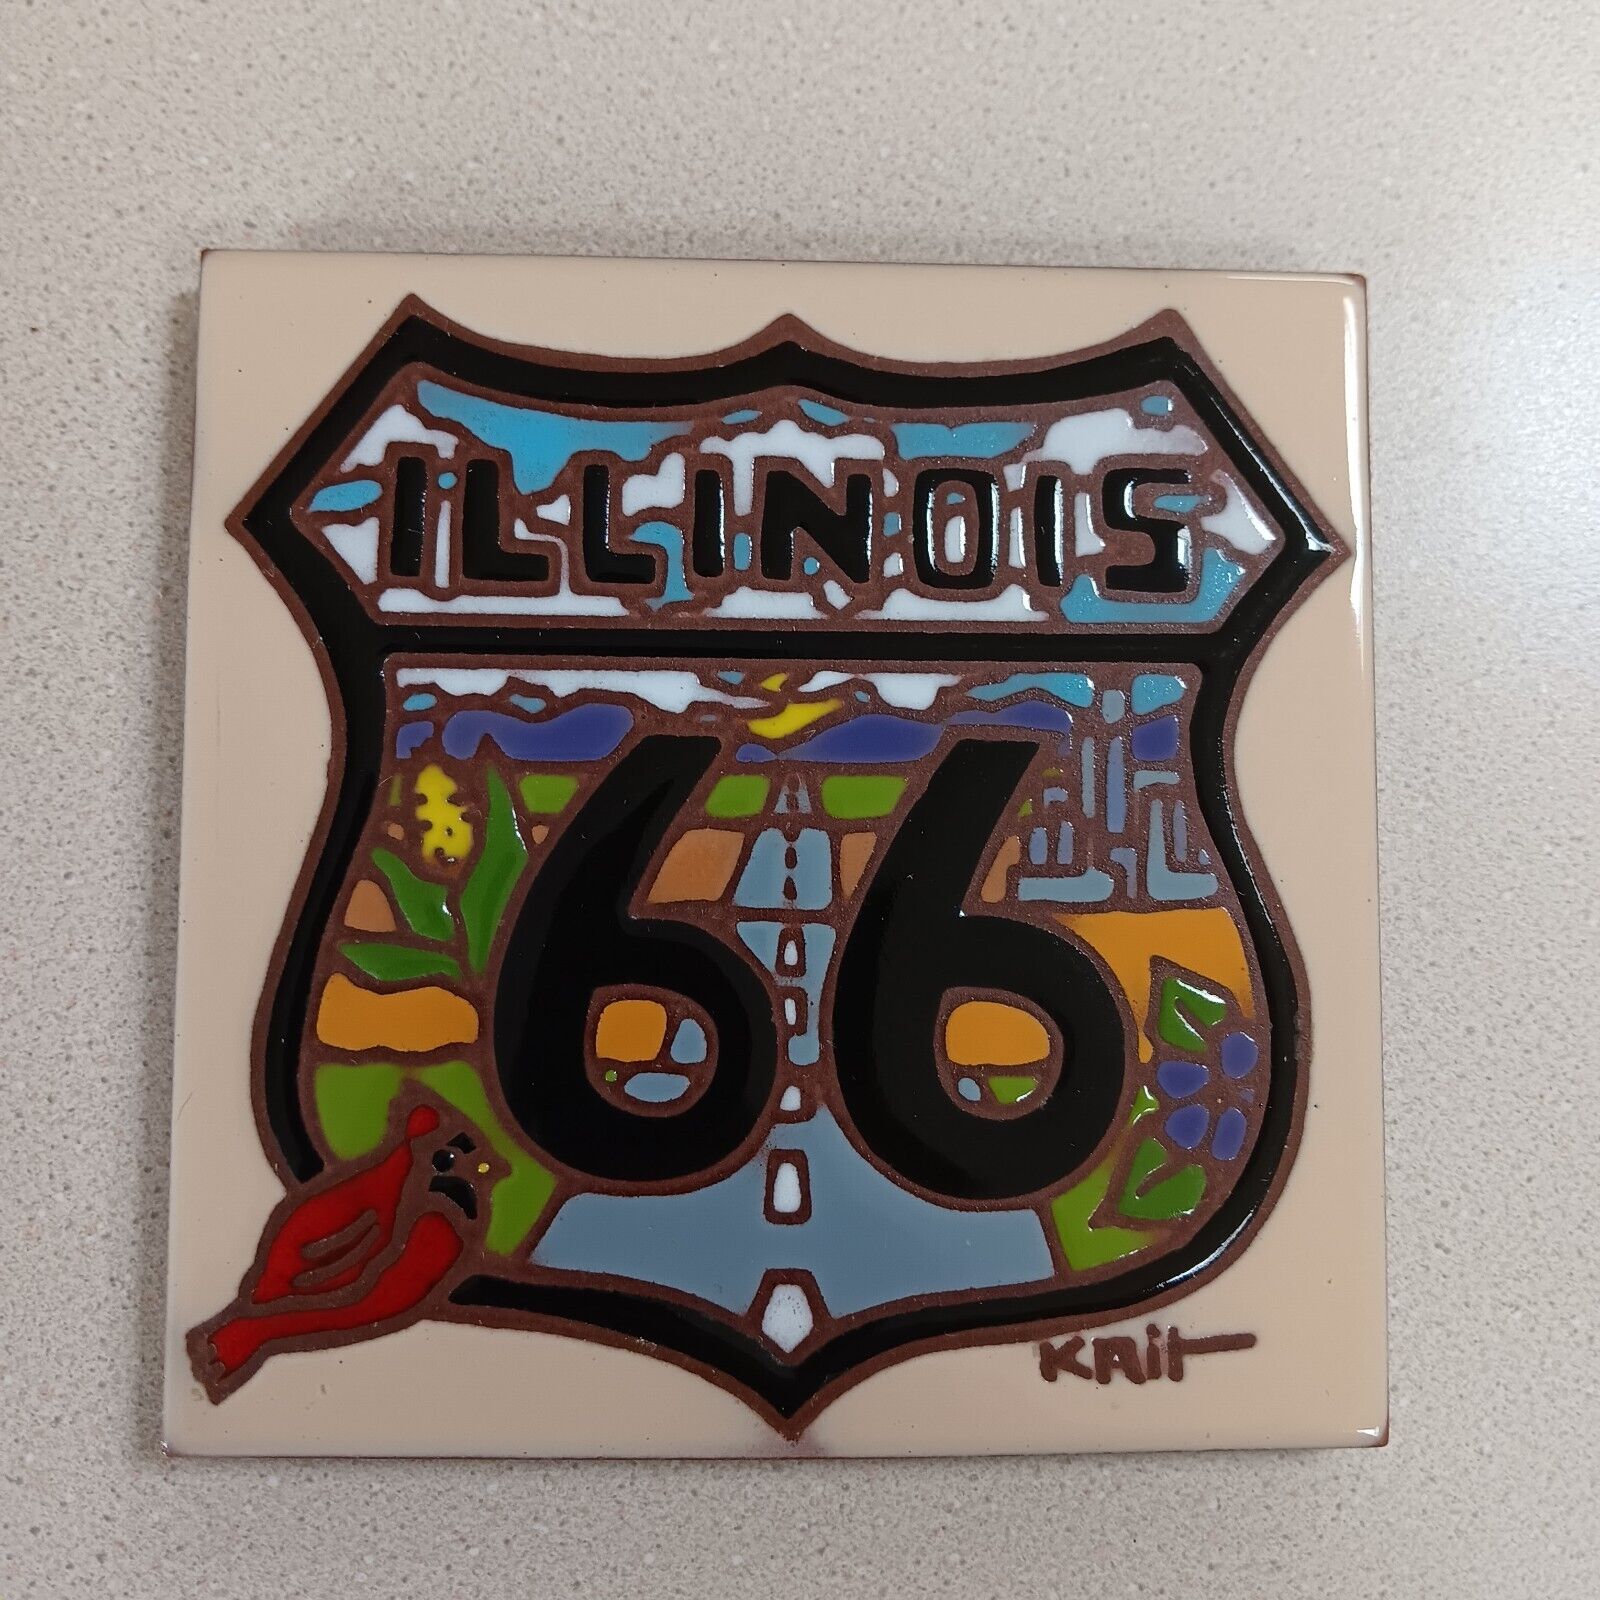 Vintage Illinois Route 66 Colorful Ceramic Tile Very Nice